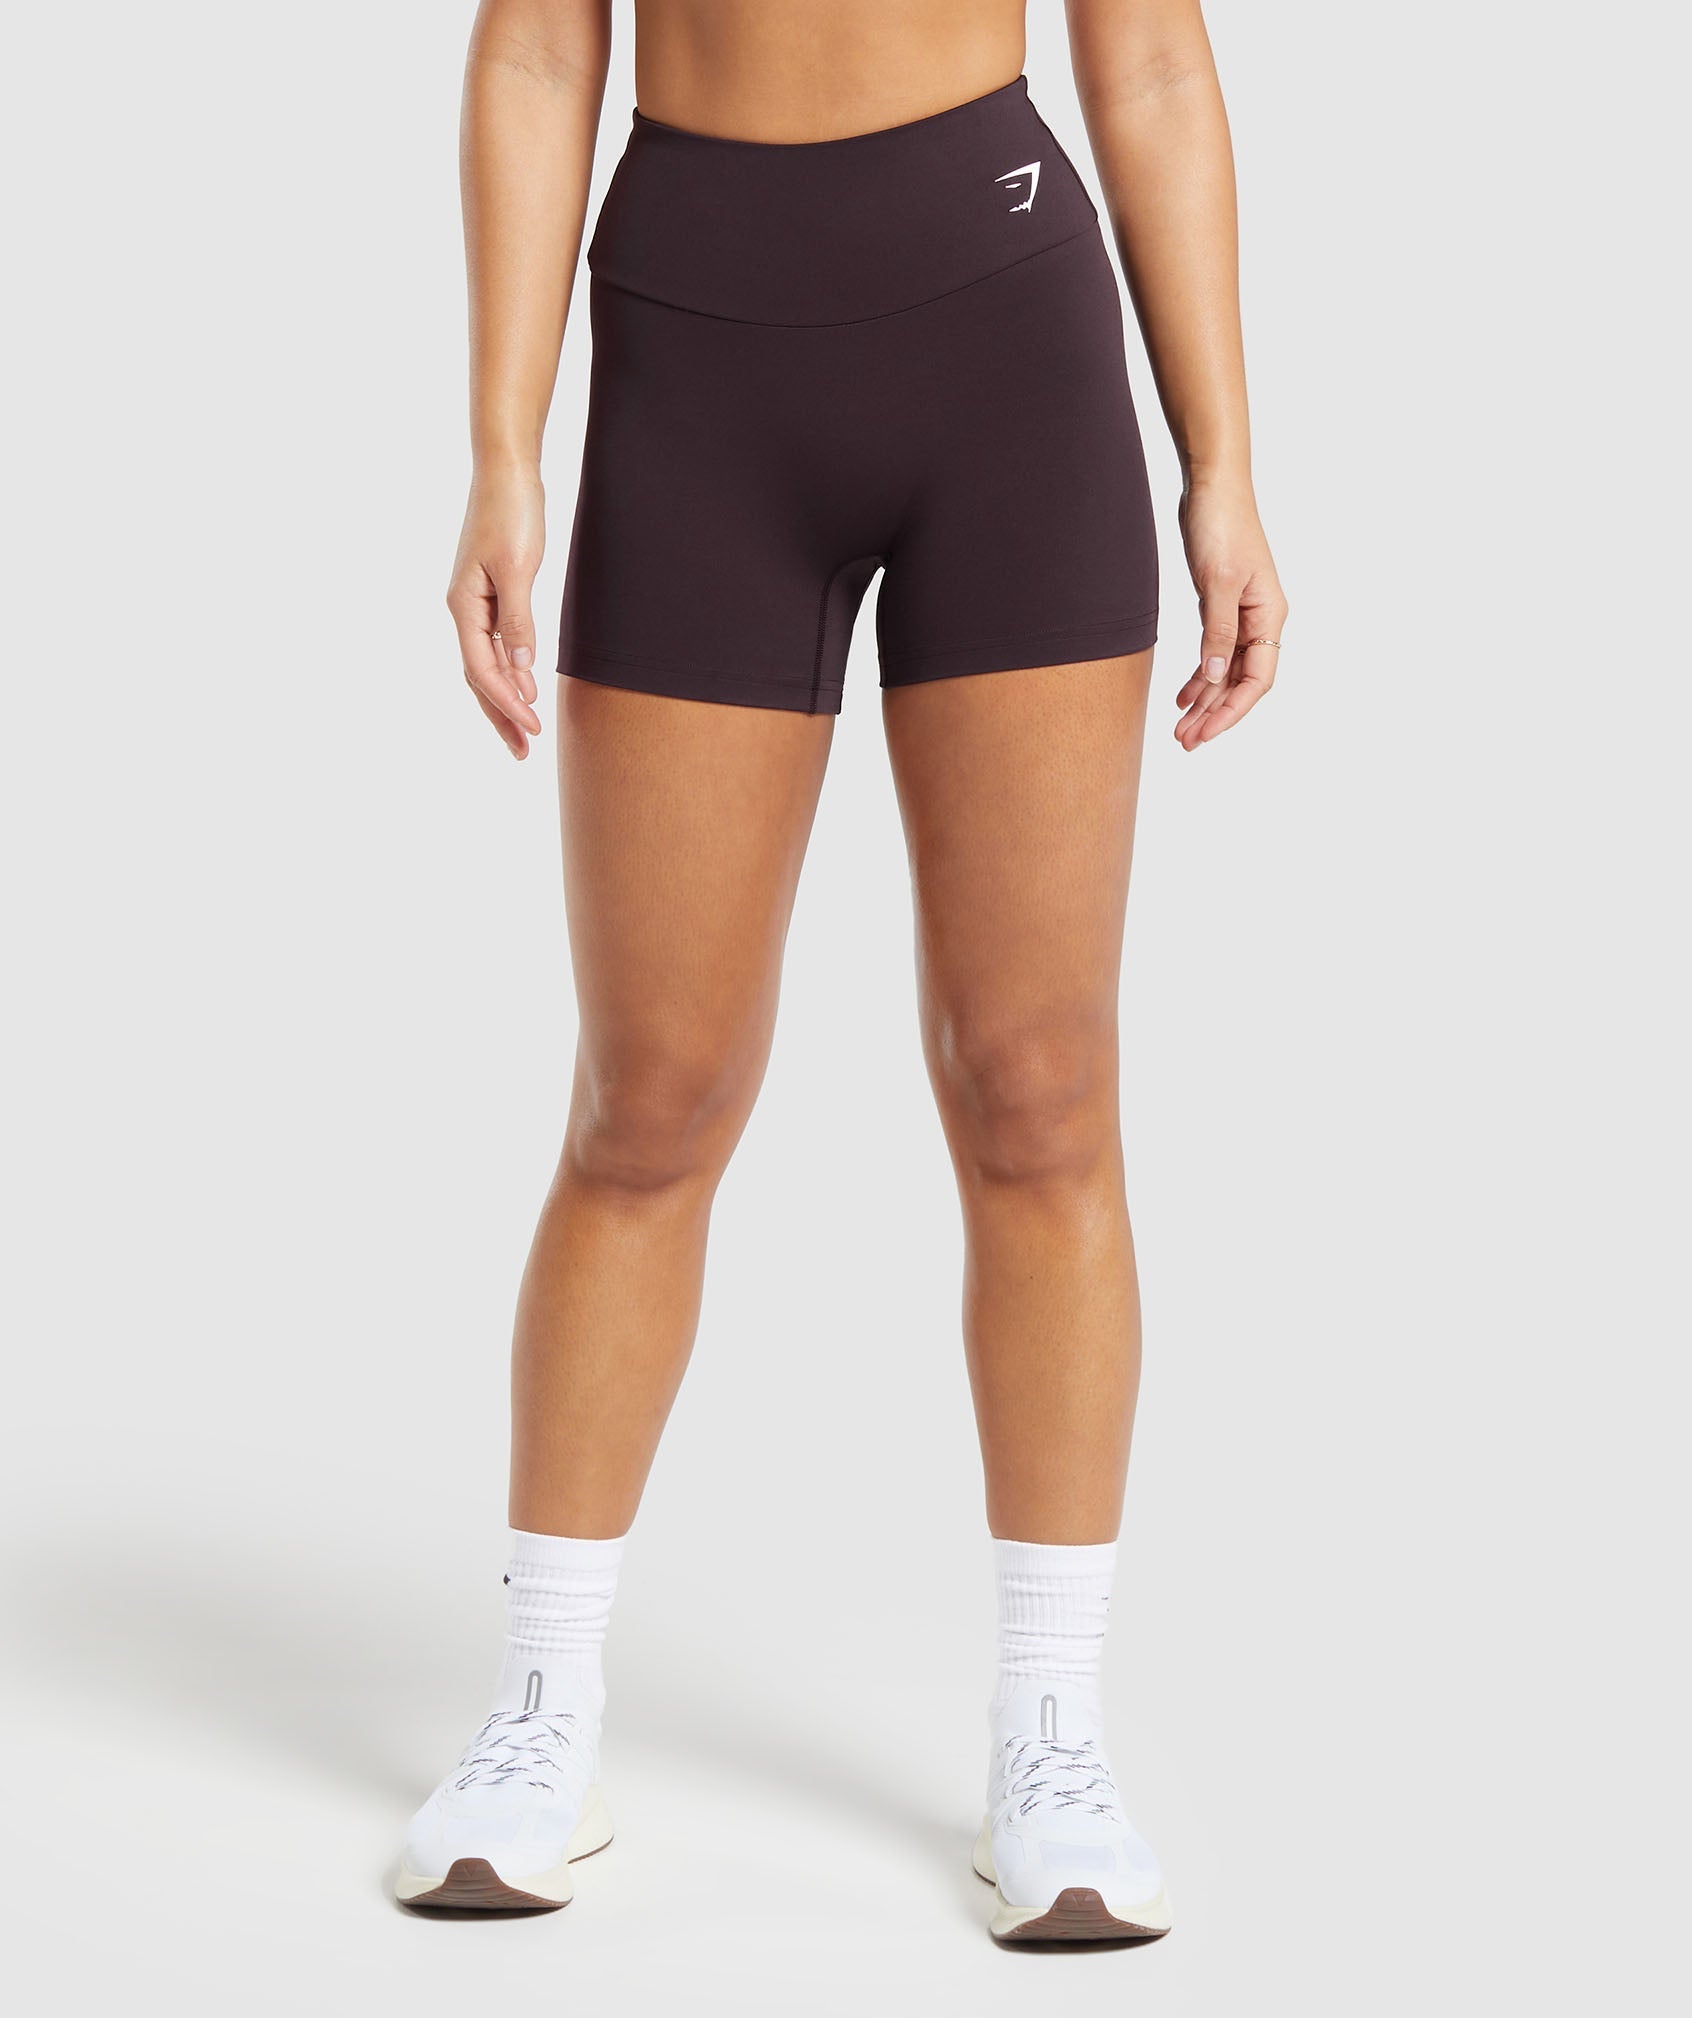 Training Shorts in Plum Brown